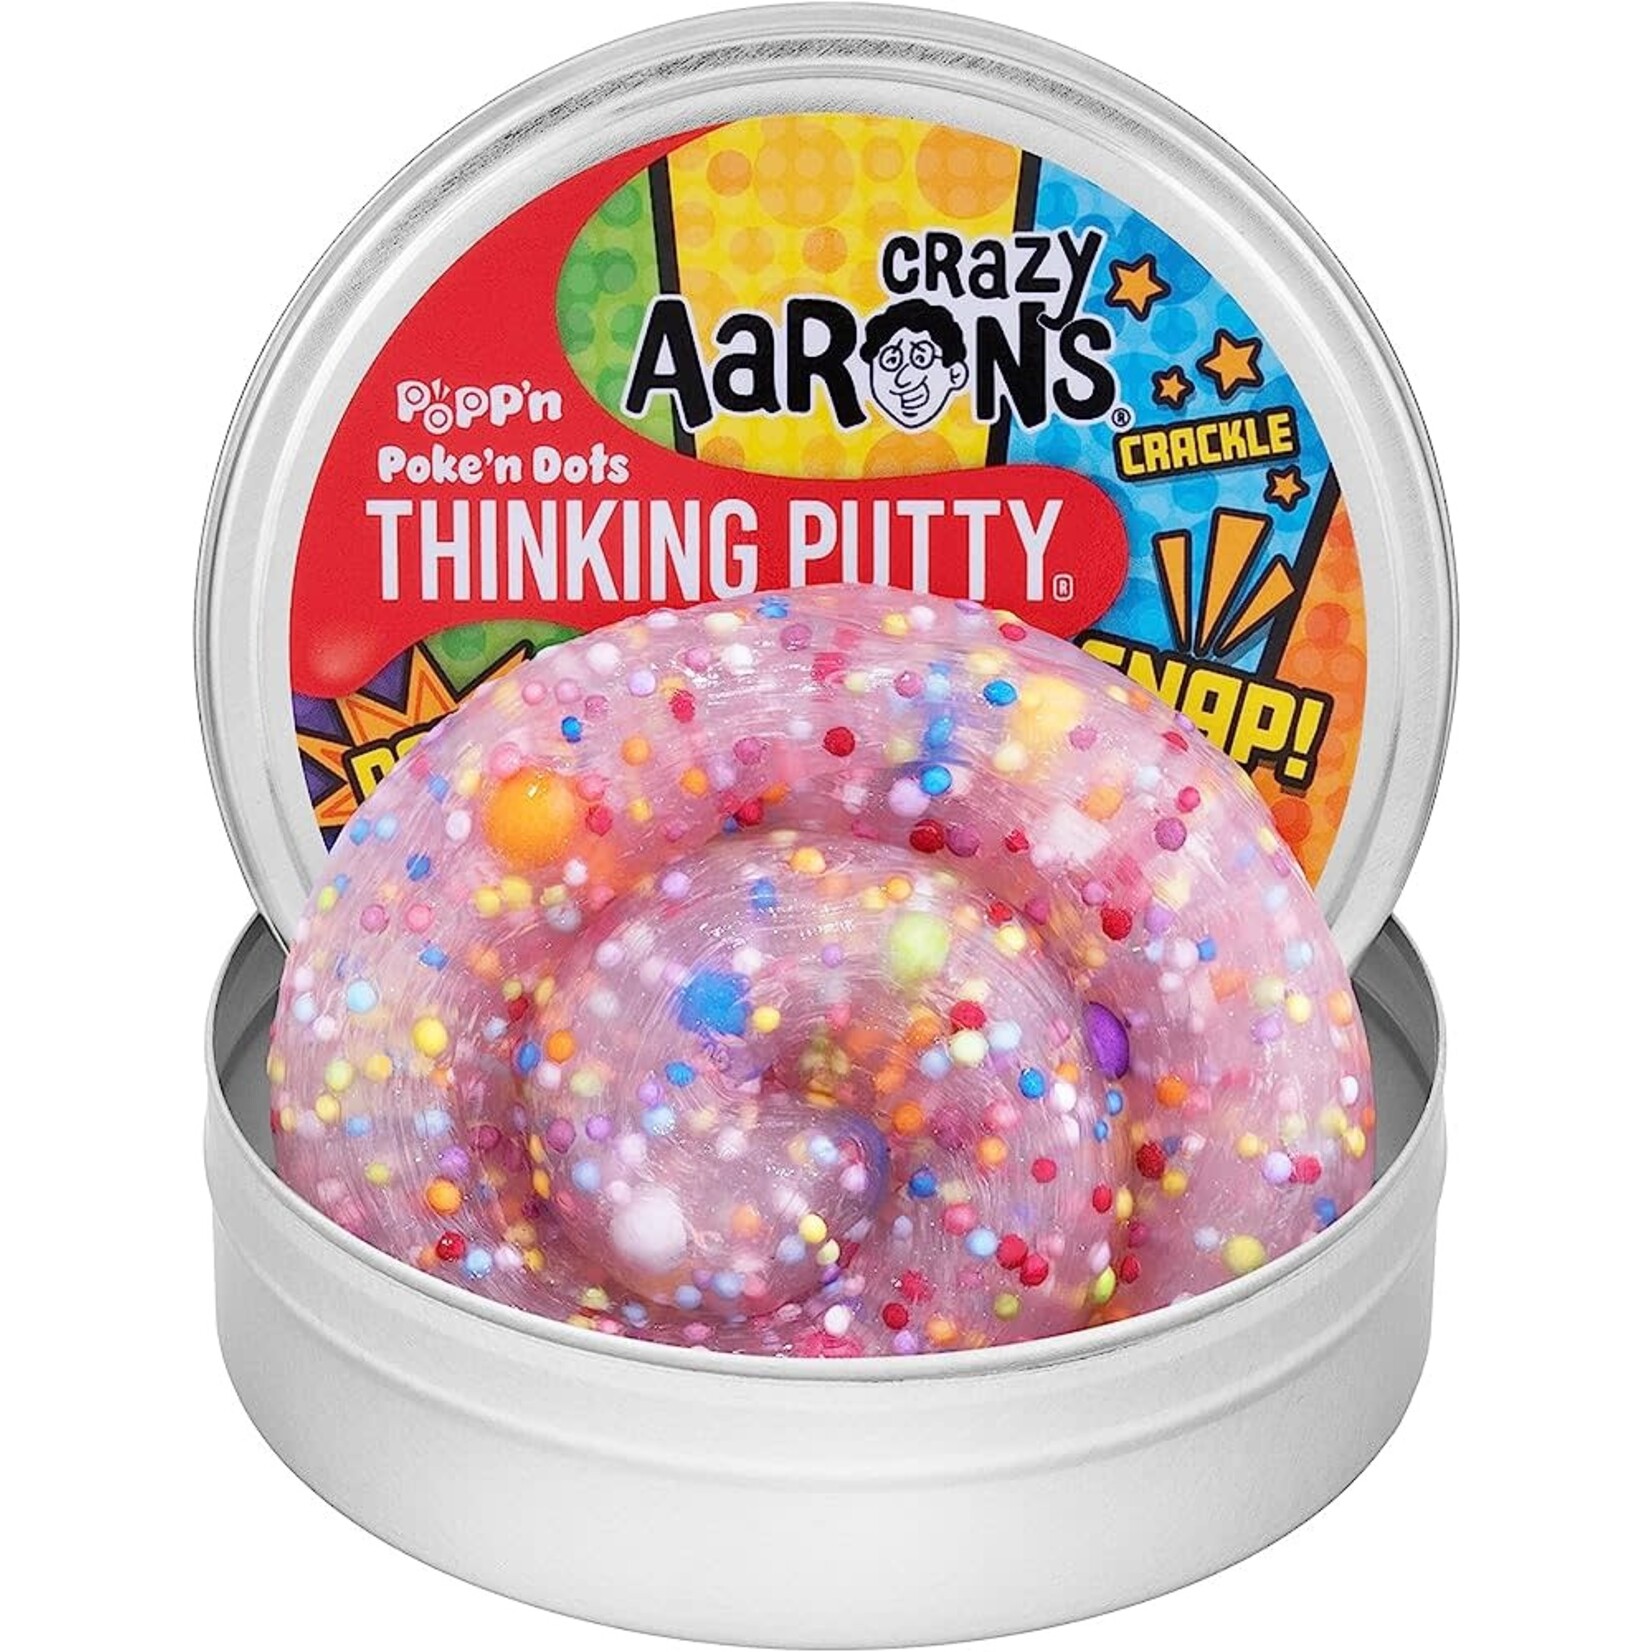 Crazy Aaron's Thinking Putty Poke 'n Dots Popp'n Thinking Putty